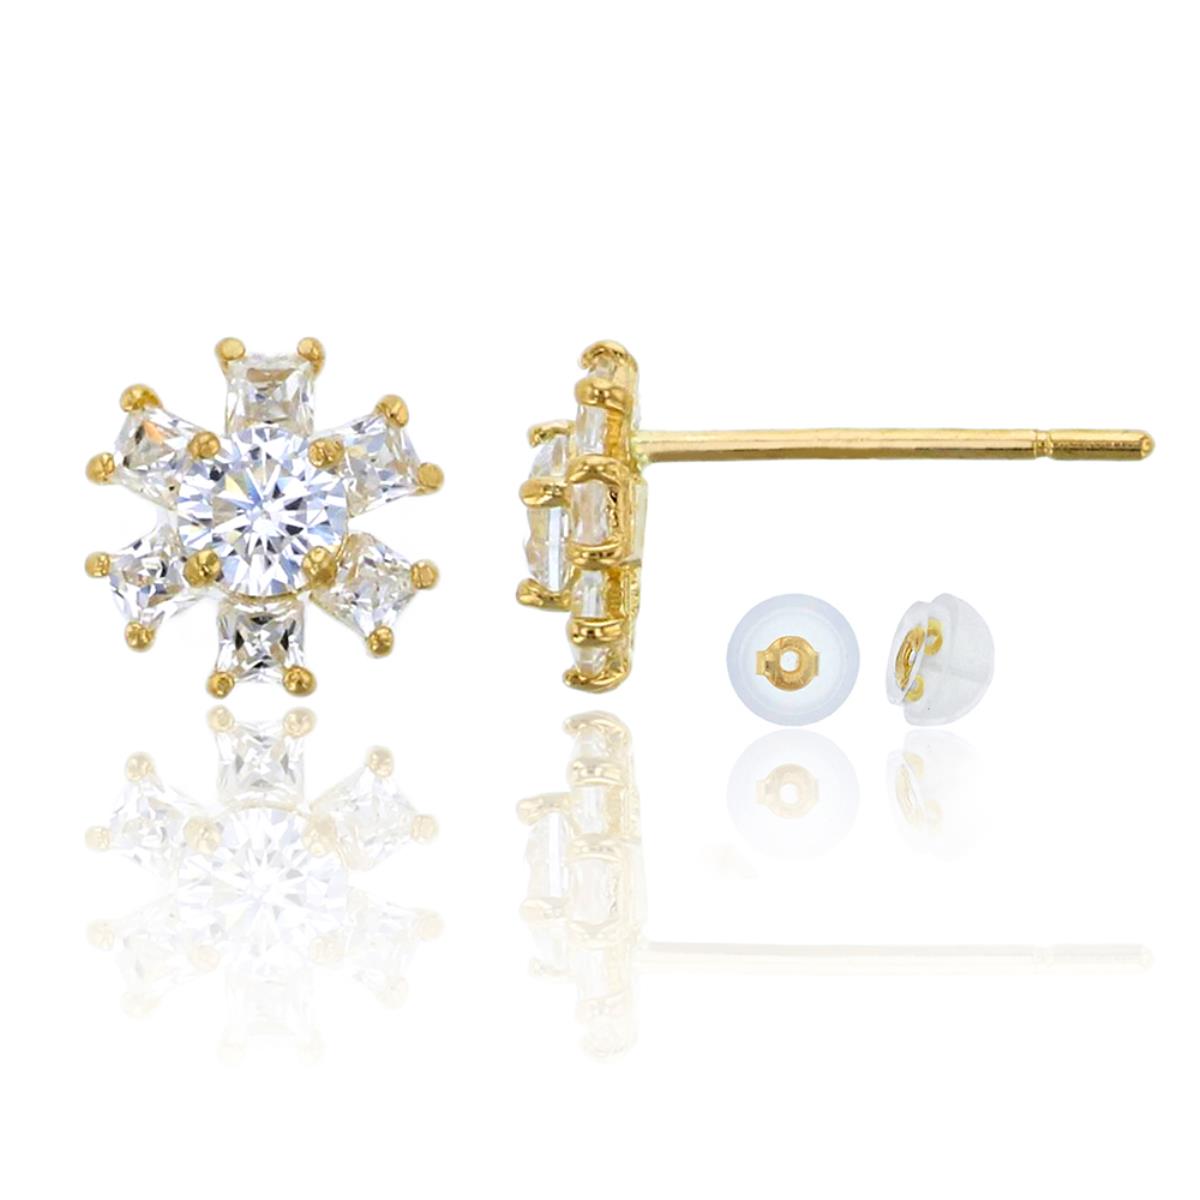 10K Yellow Gold 3mm Rd & 2mm Sq Cut Flower Stud Earring & 10K Silicone Back